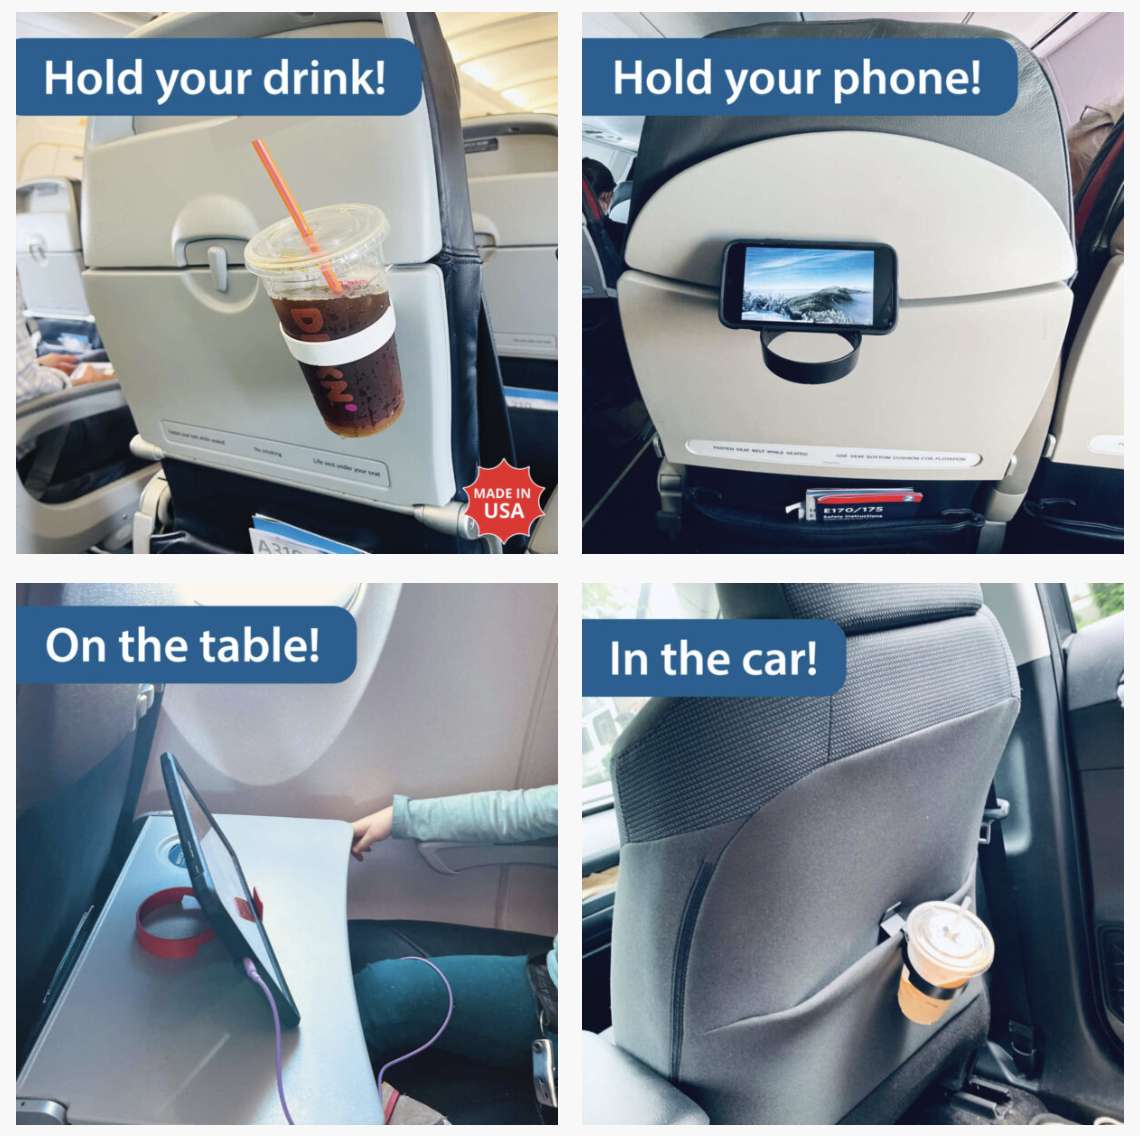 WHO INVENTED THE AIRPLANE TRAY TABLE?